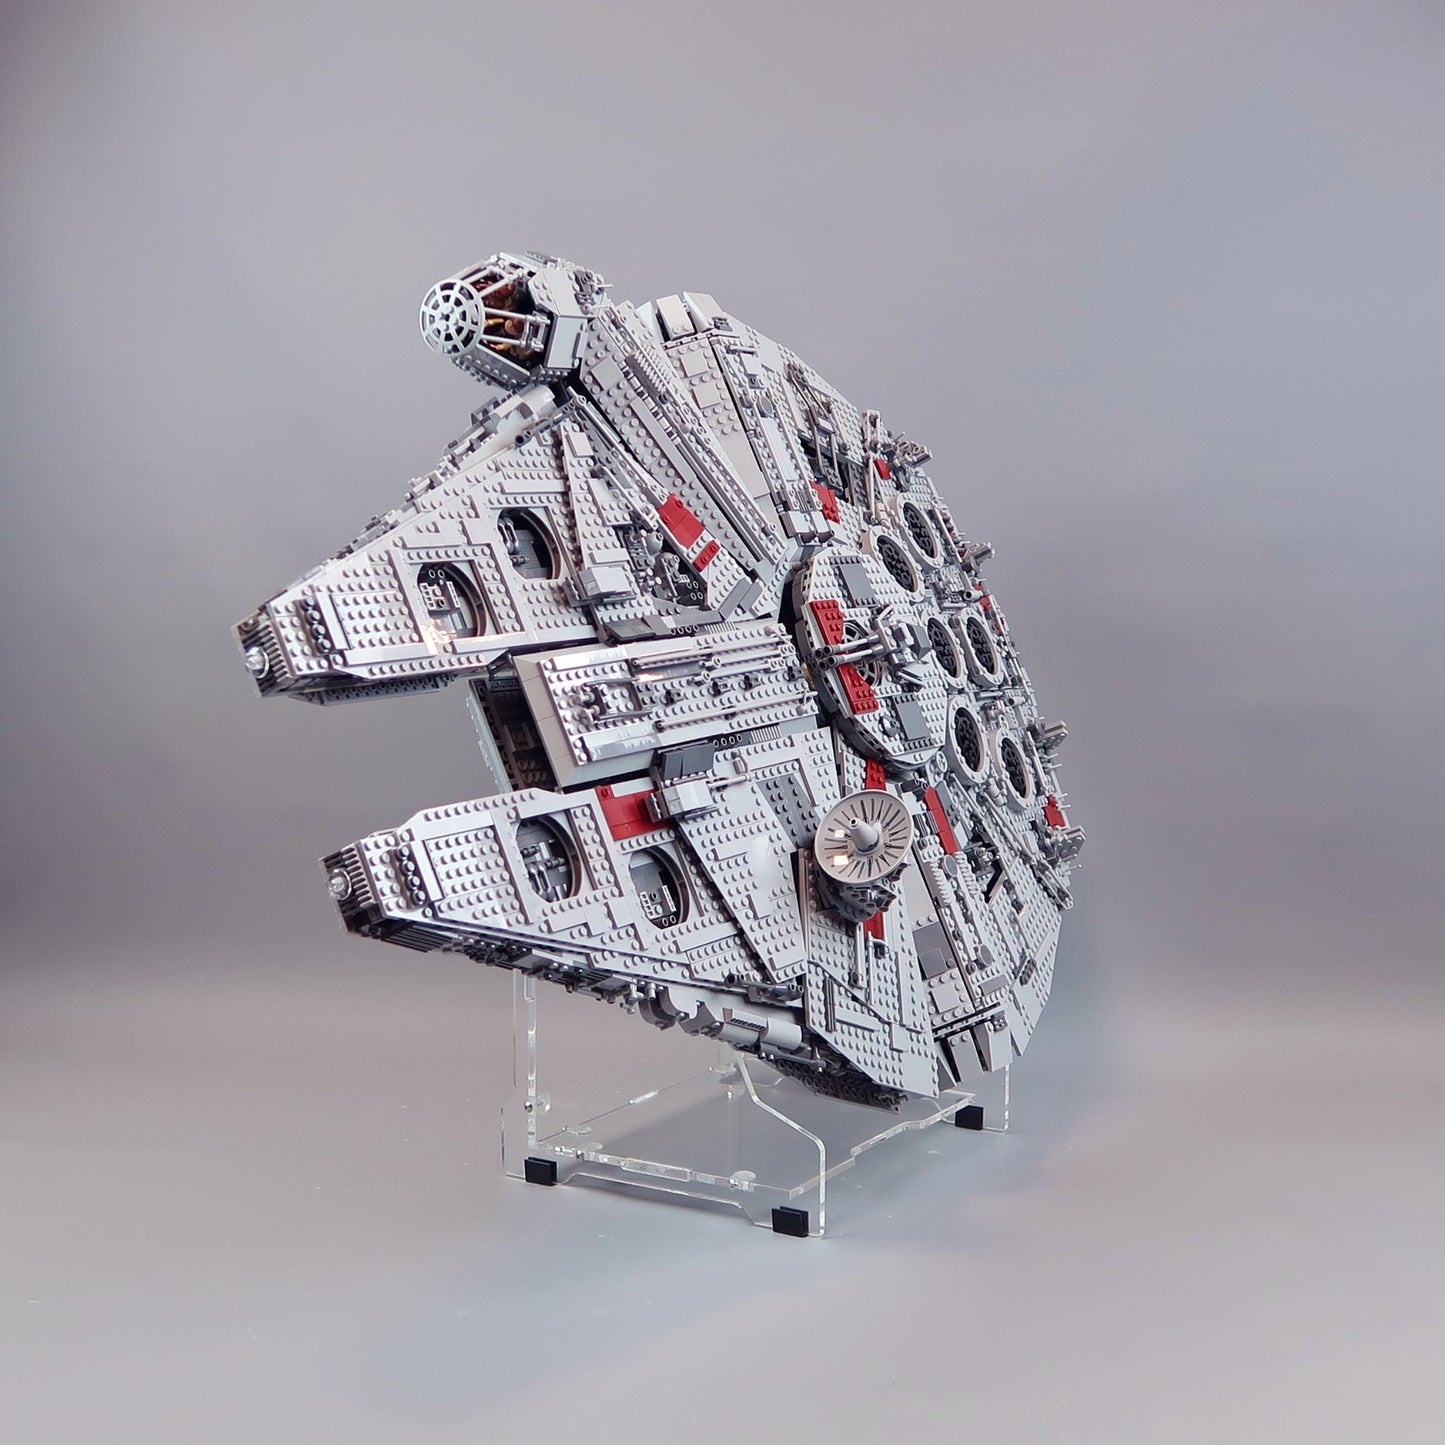 2 in 1 Display Stand for 75192/10179 UCS Millennium Falcon (Mark 1)